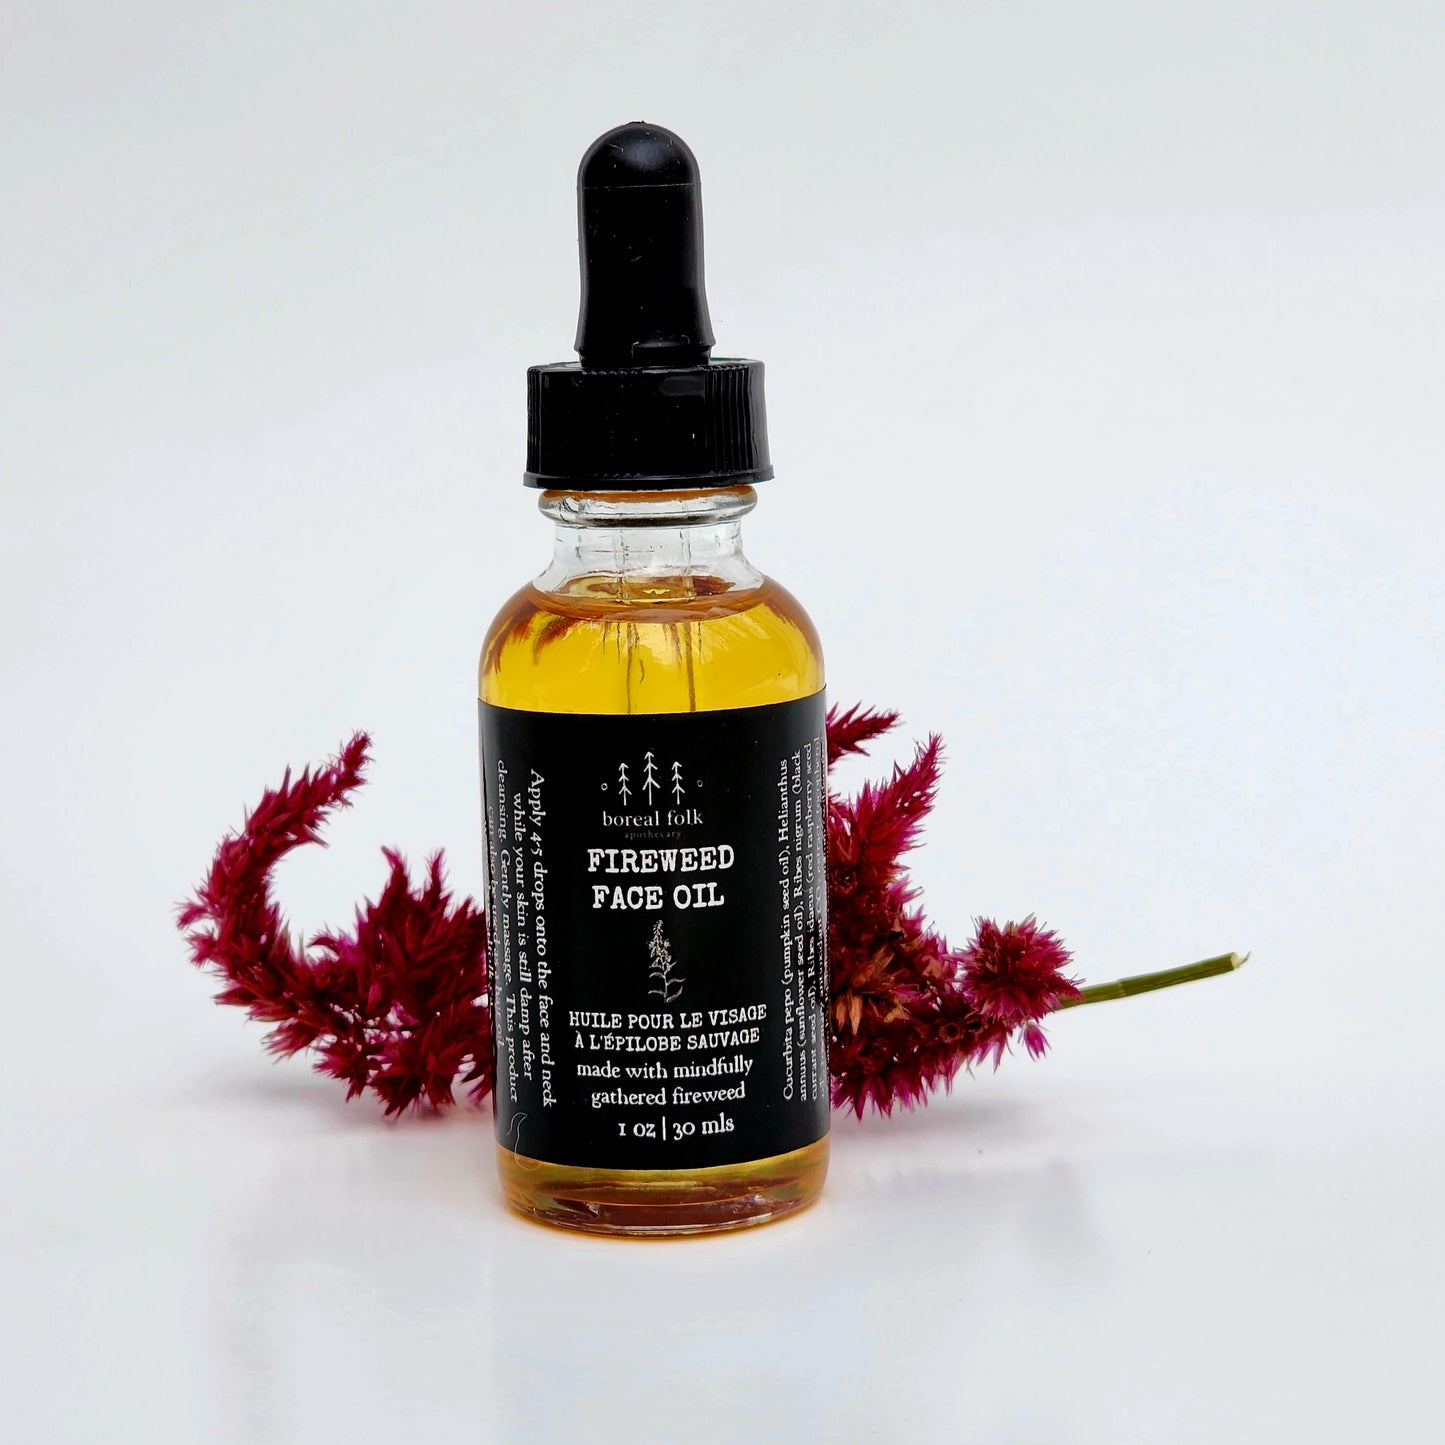 Fireweed Face Oil